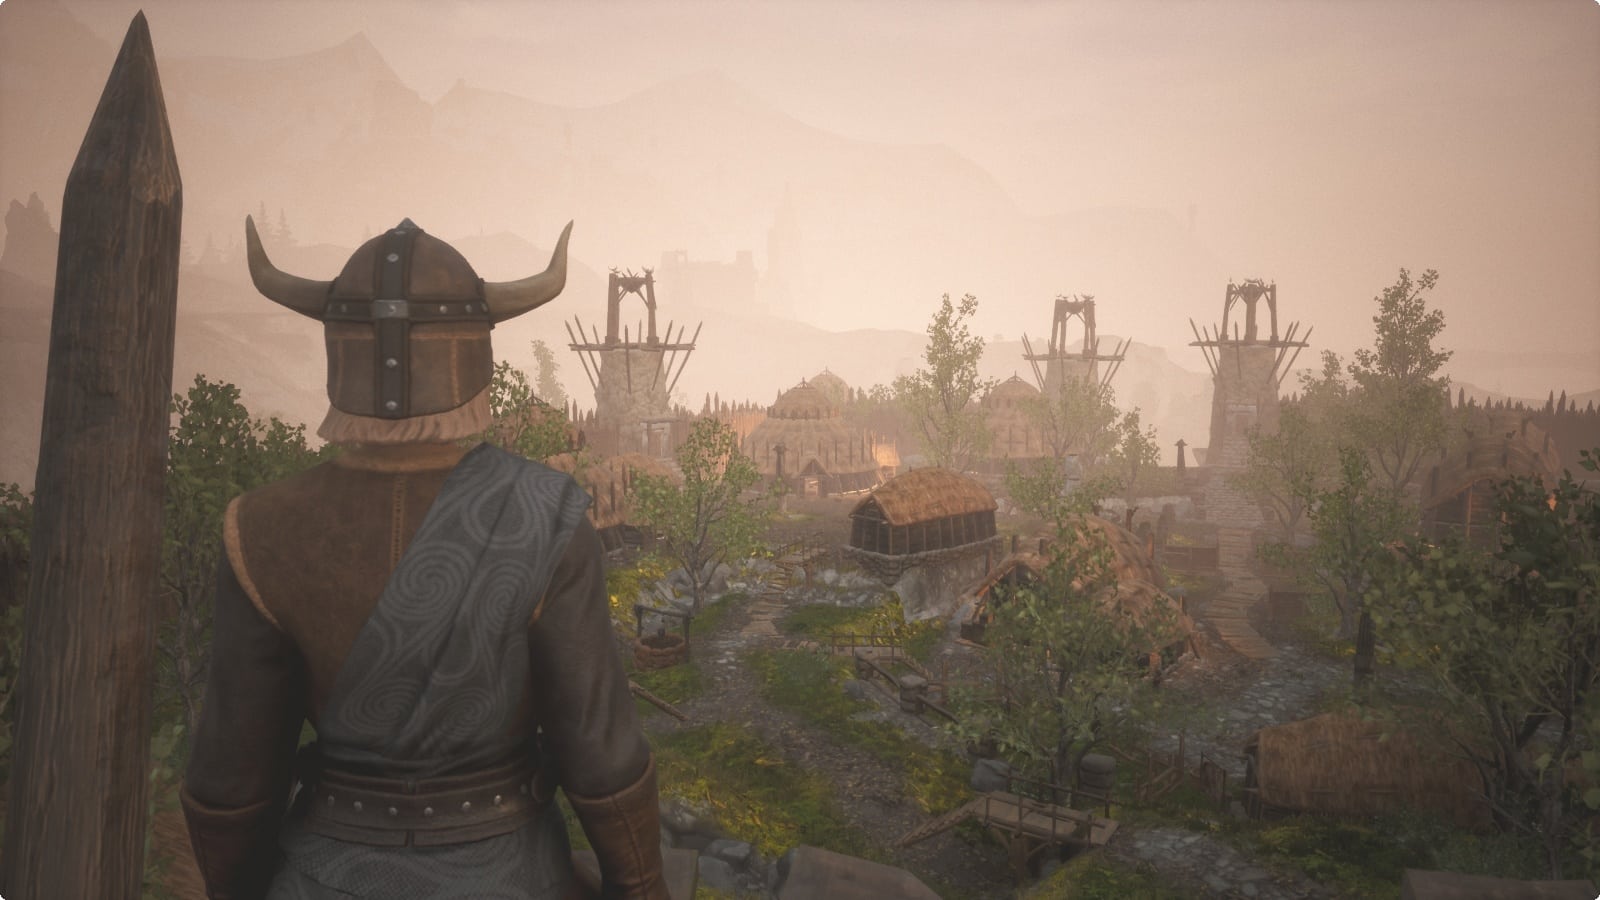 (Best view of the NPC settlement New Asagarth from the base game we get after climbing one of the towers.)